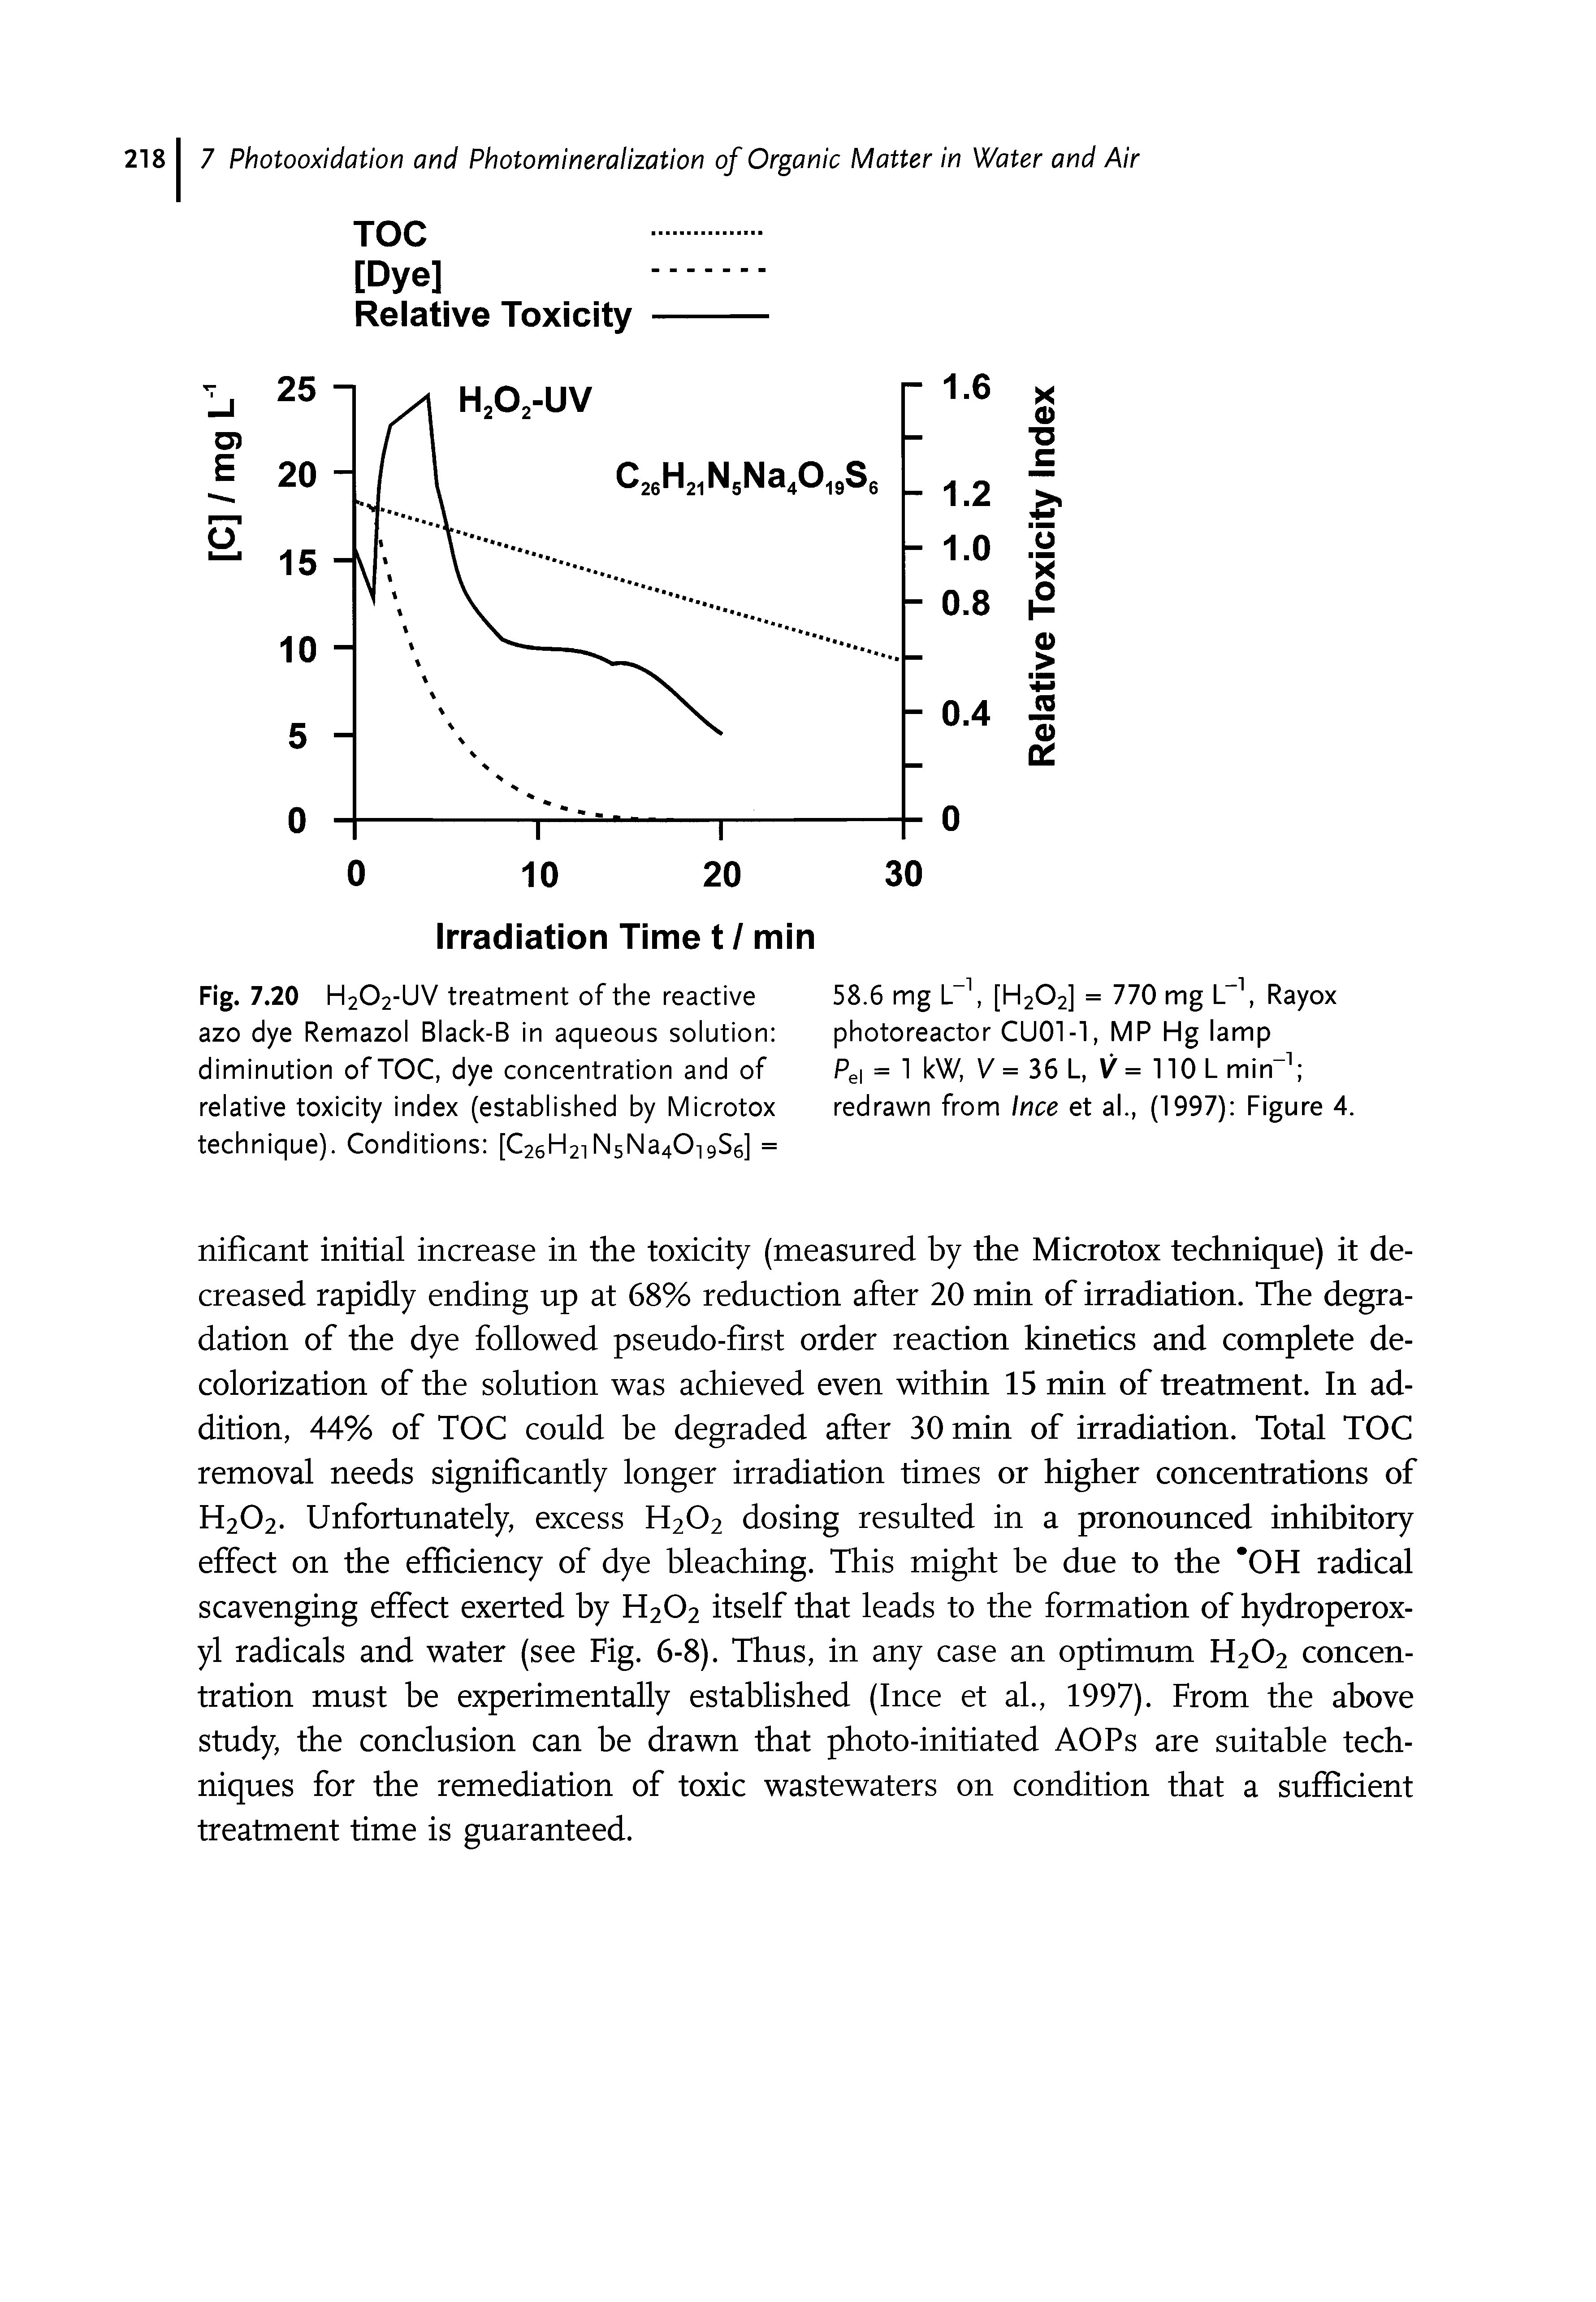 Fig. 7.20 H2O2-UV treatment of the reactive azo dye Remazol Black-B in aqueous solution diminution ofTOC, dye concentration and of relative toxicity index (established by Microtox technique). Conditions [C26H2iN5Na40i9Se] =...